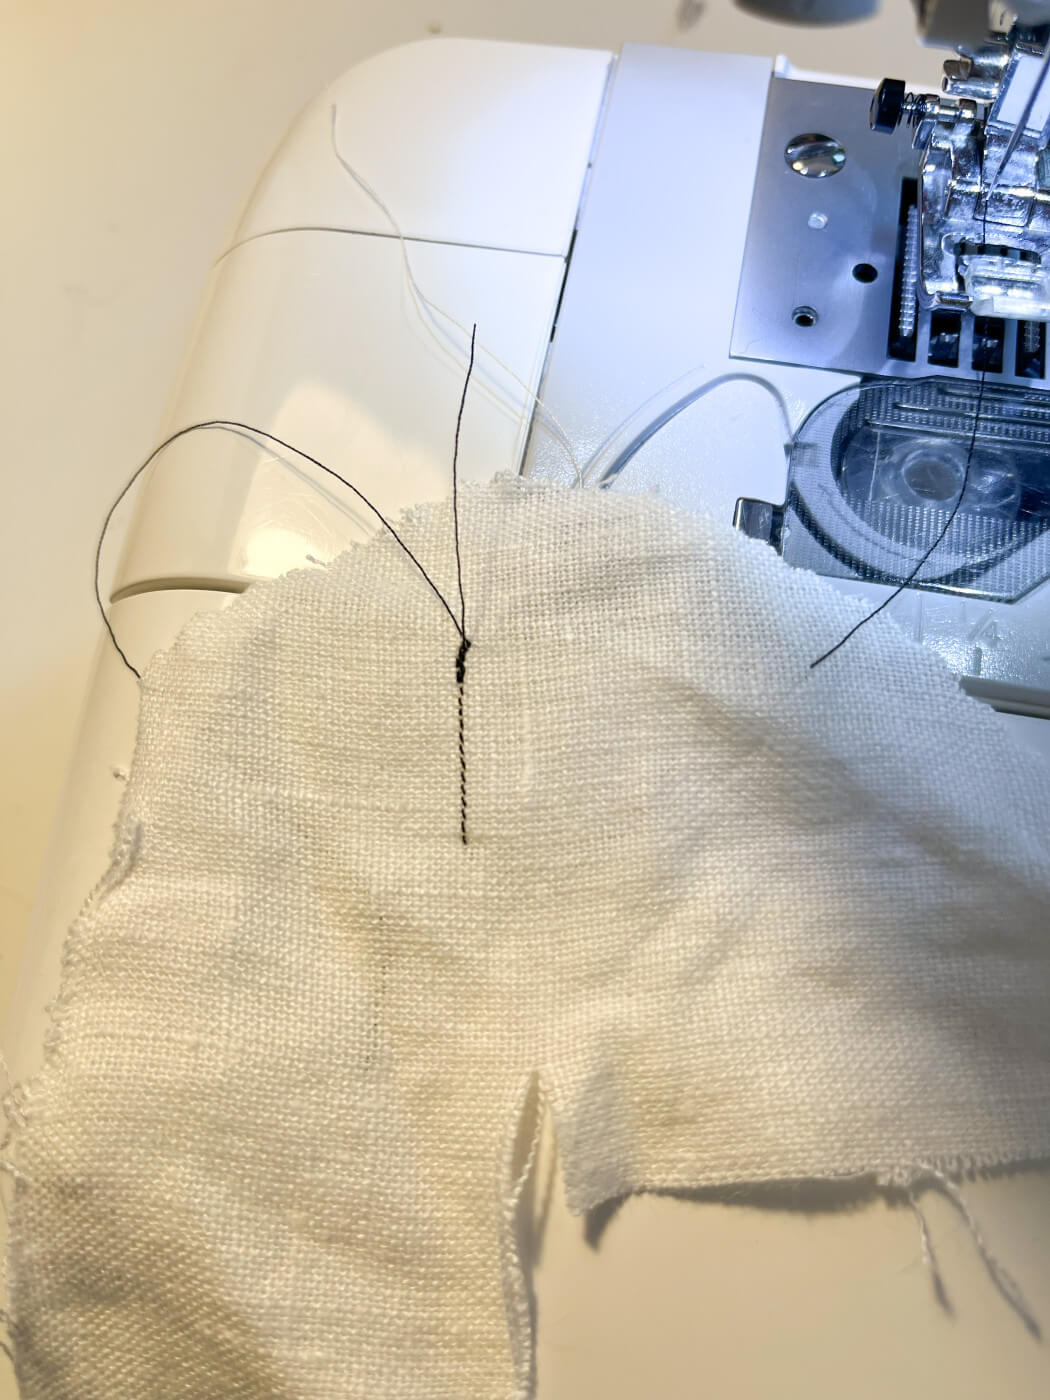 how to backstitch on a sewing machine